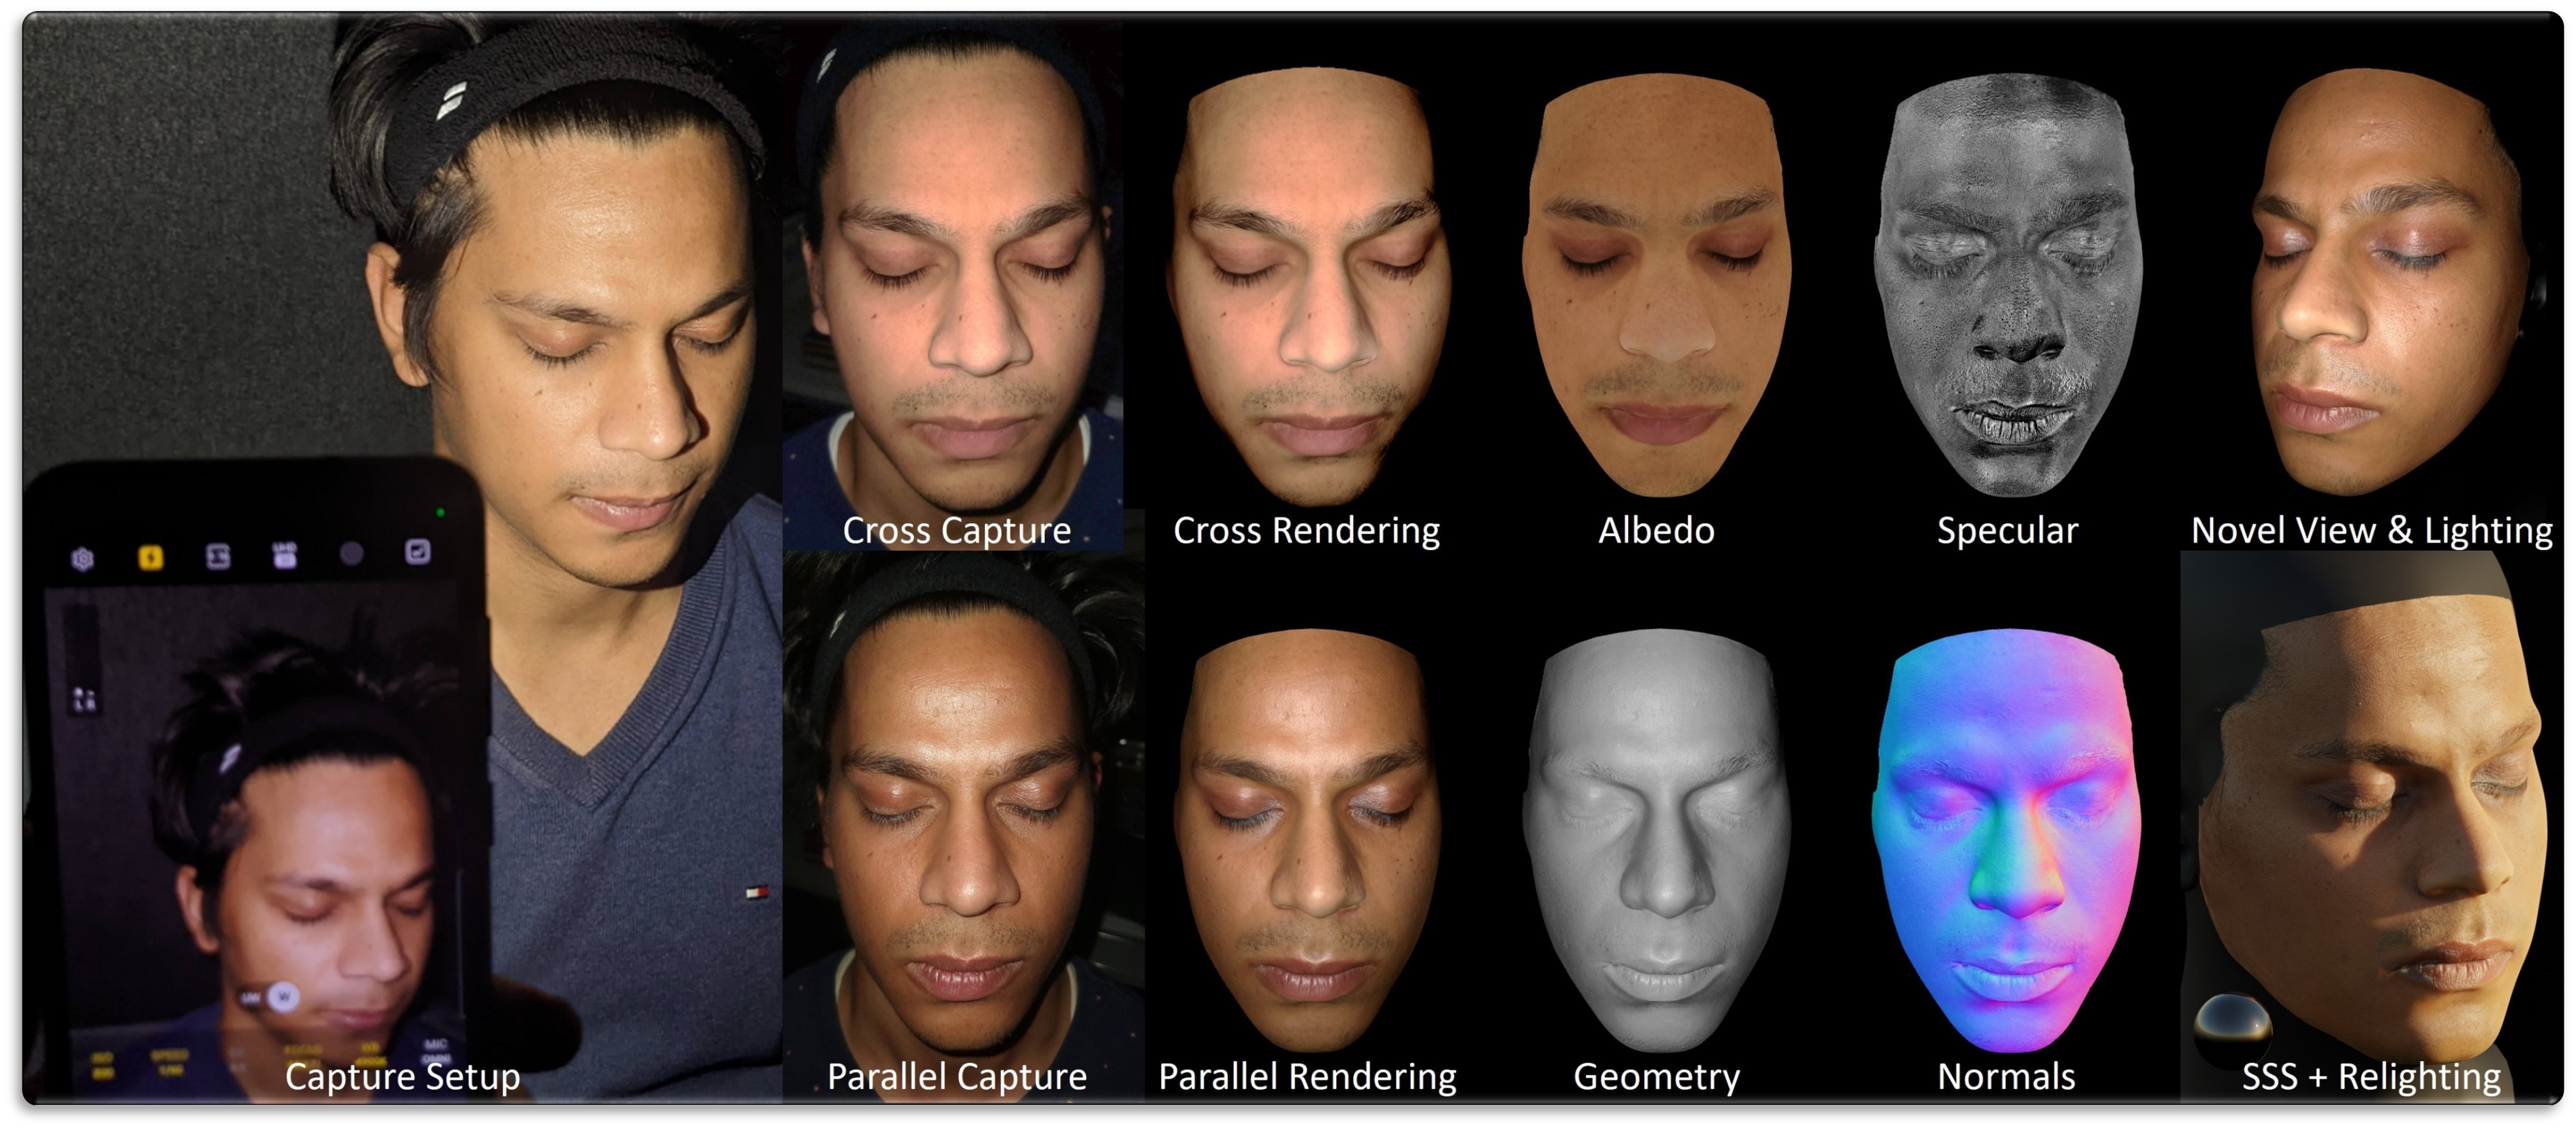 High-Res Facial Appearance Capture from Polarized Smartphone Images